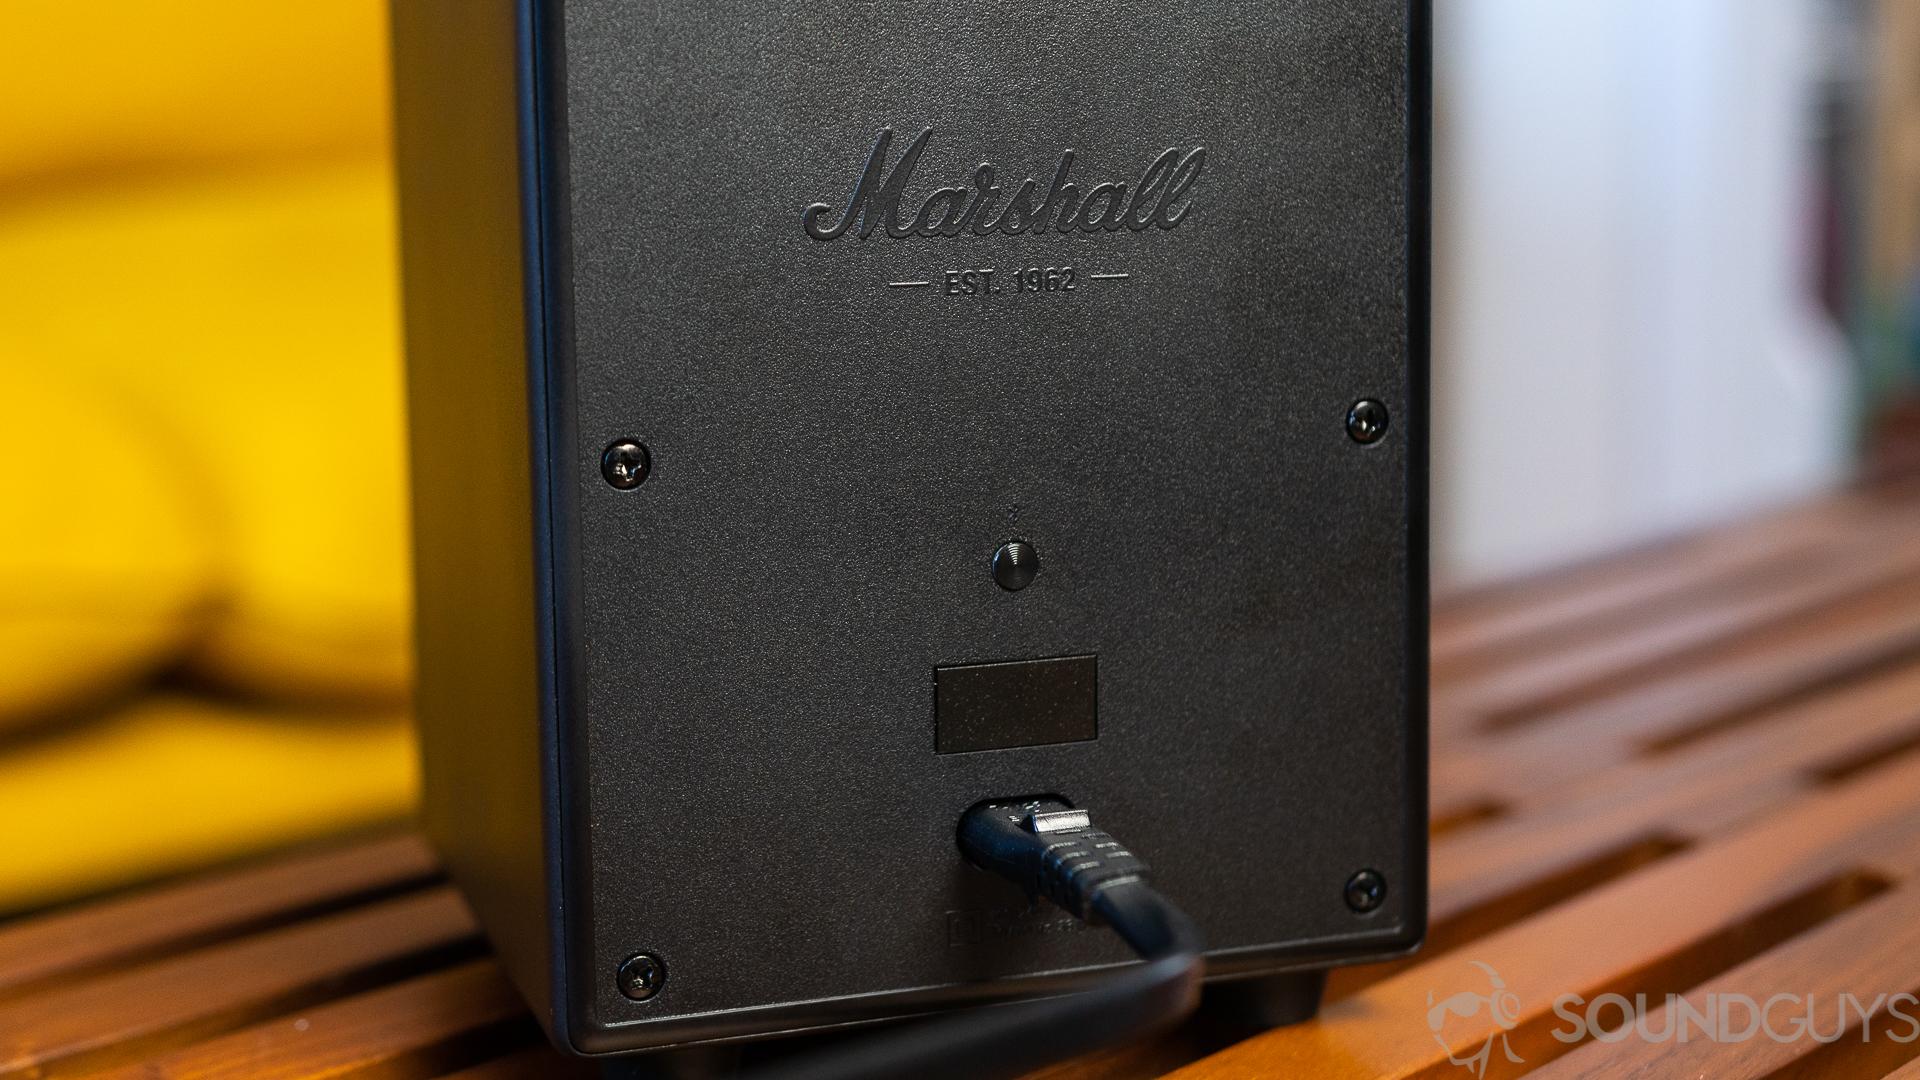 Close-up of Marshall Uxbridge Voice power supply and Bluetooth button on back fo the speaker which is on top of wooden coffee table